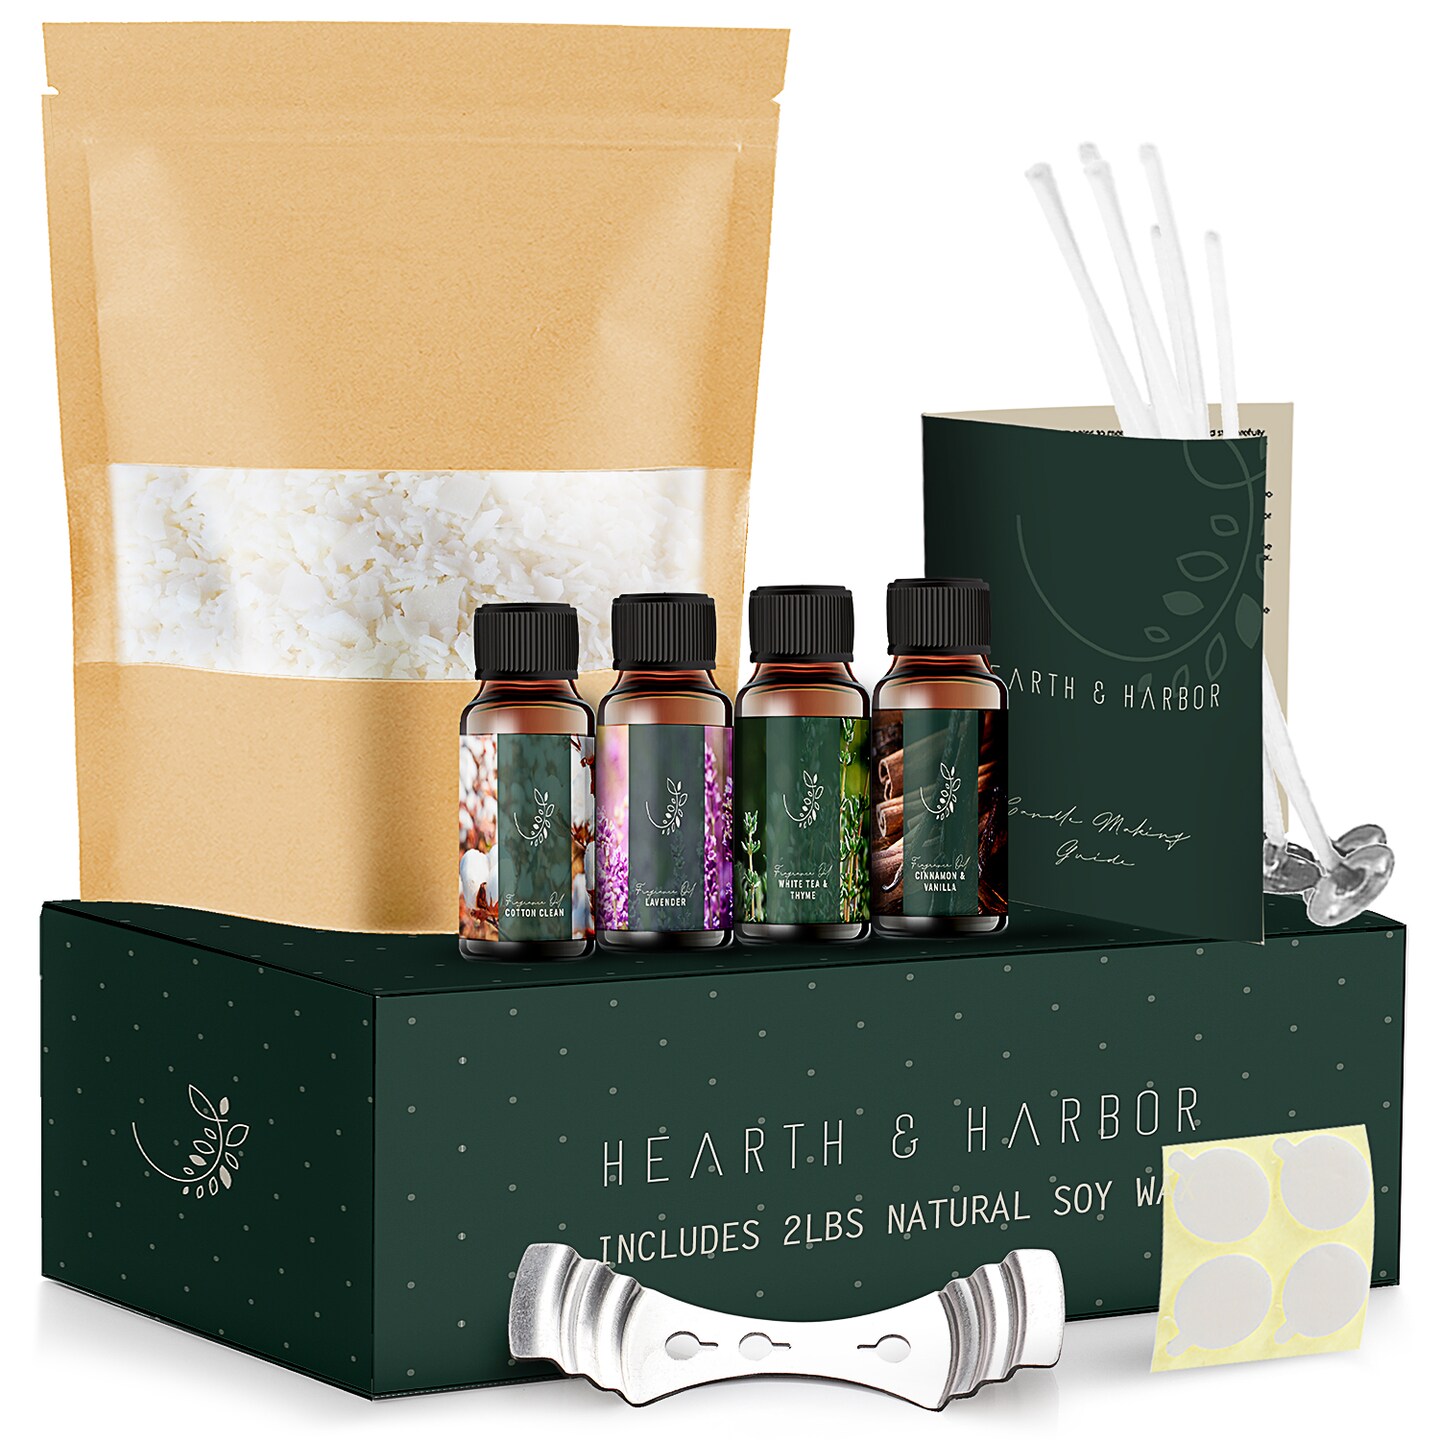 Hearth & Harbor Natural Soy Candle Making Kit for Macao